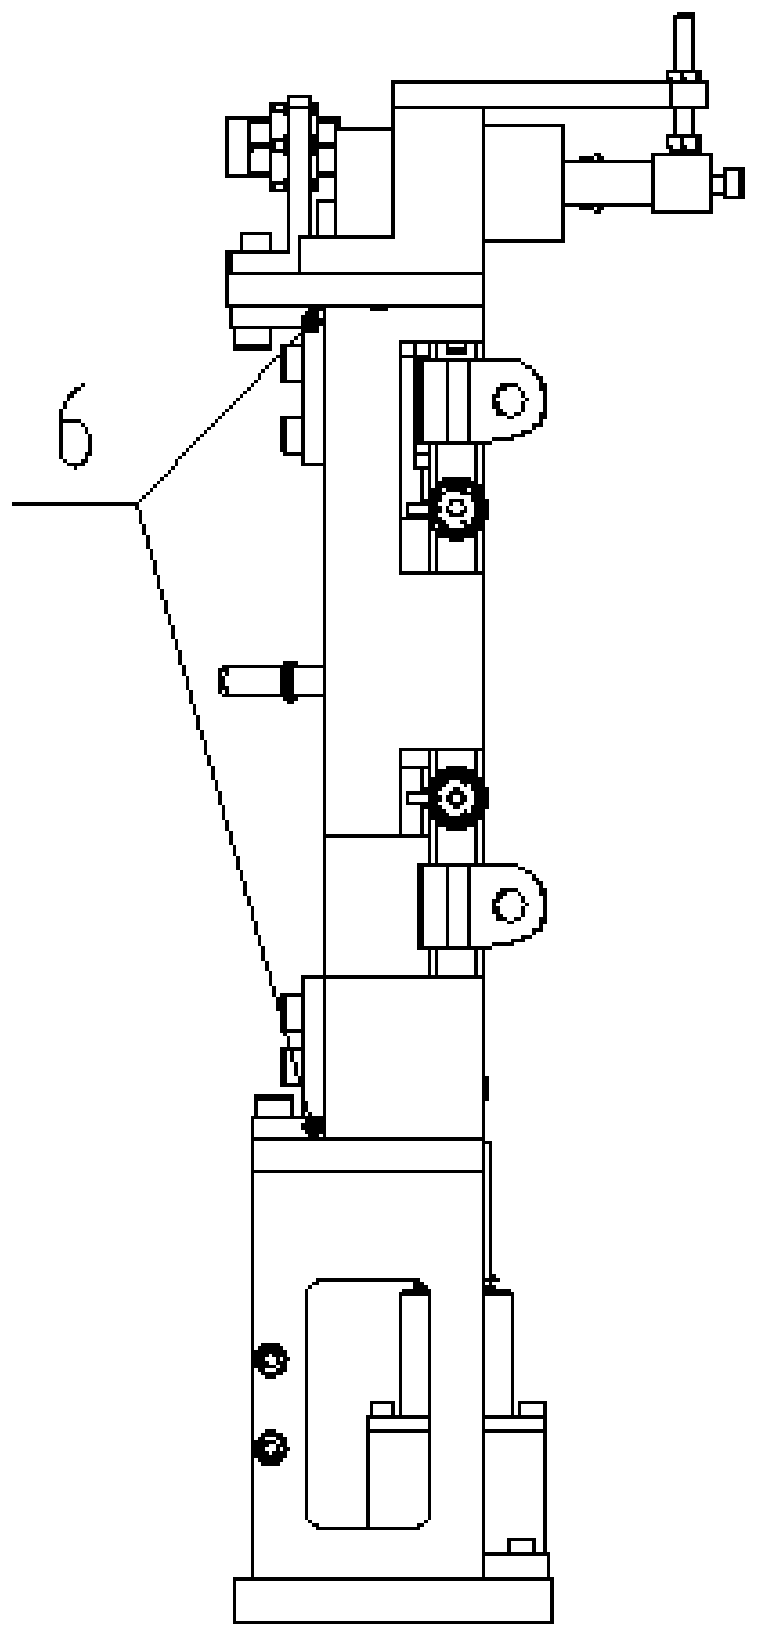 A square oil distribution pipe welding fixture